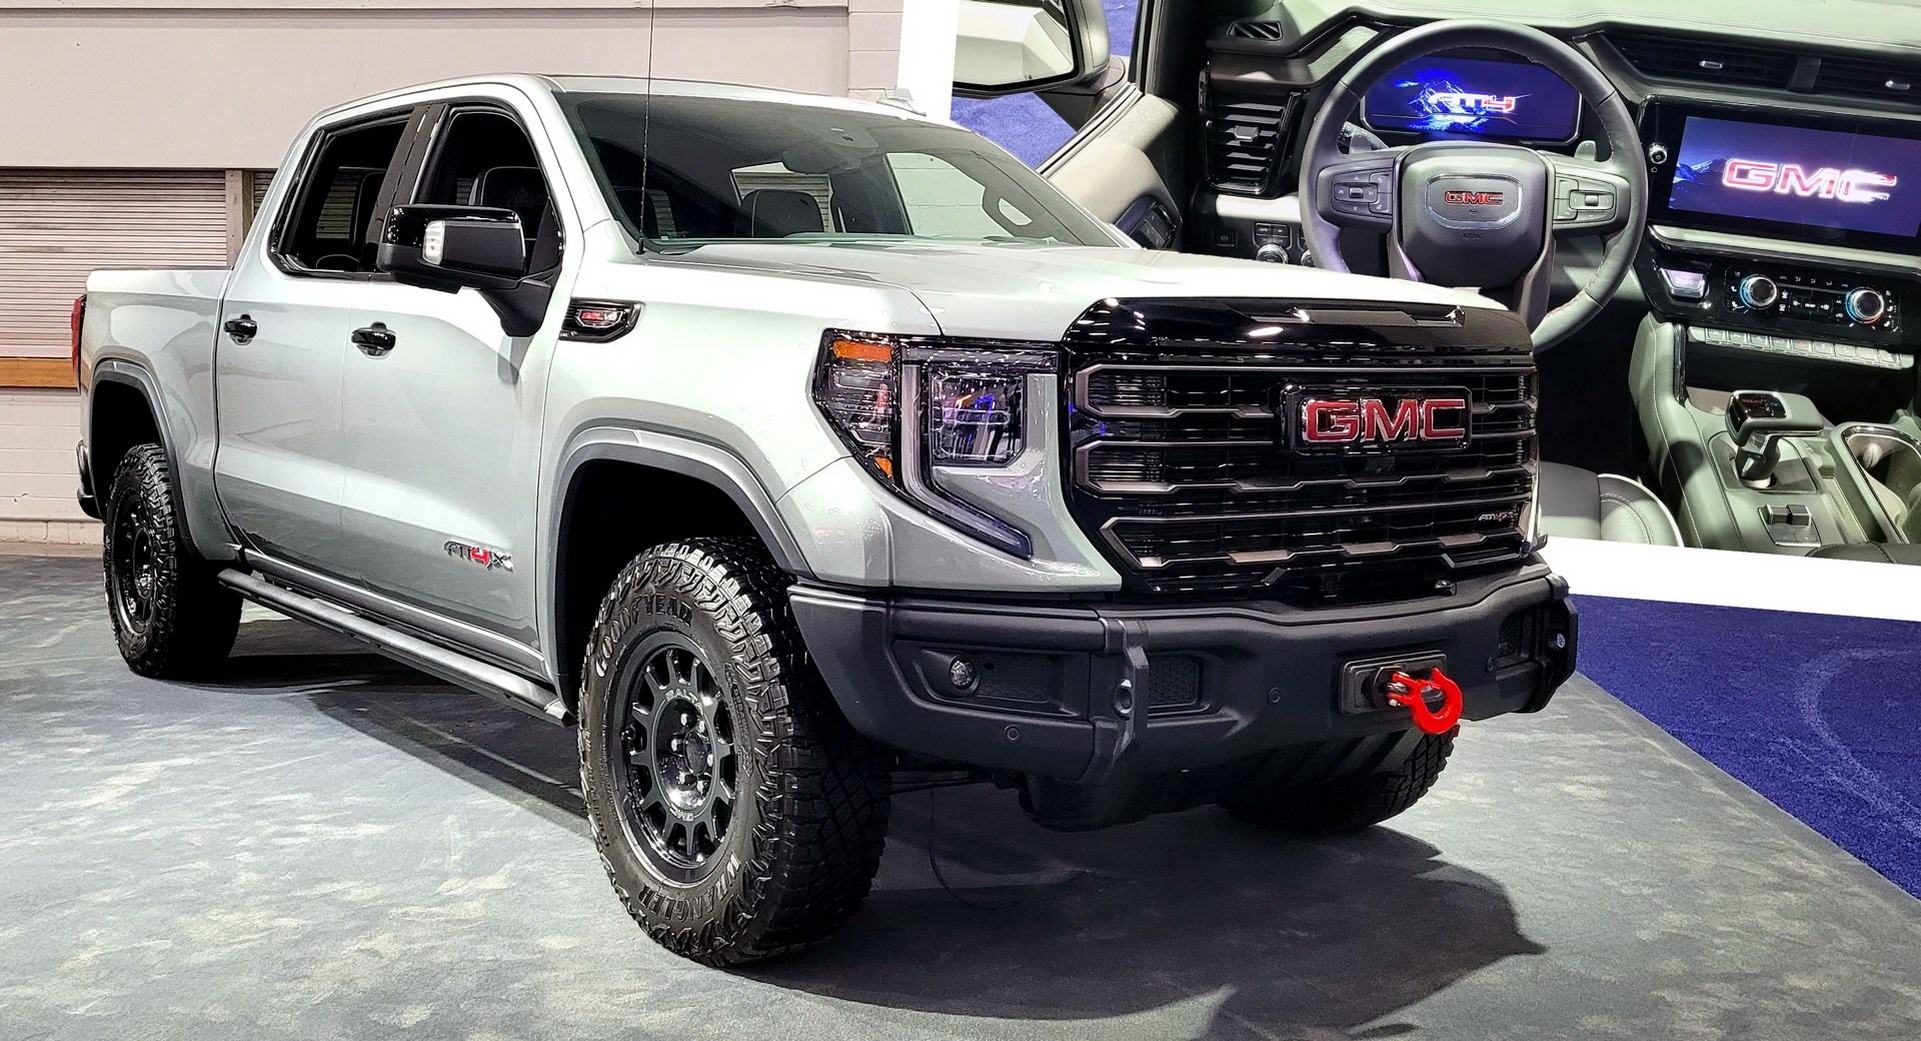 The Top 10 Off-Road Vehicles for Conquering Any Terrain - GMC Sierra AT4